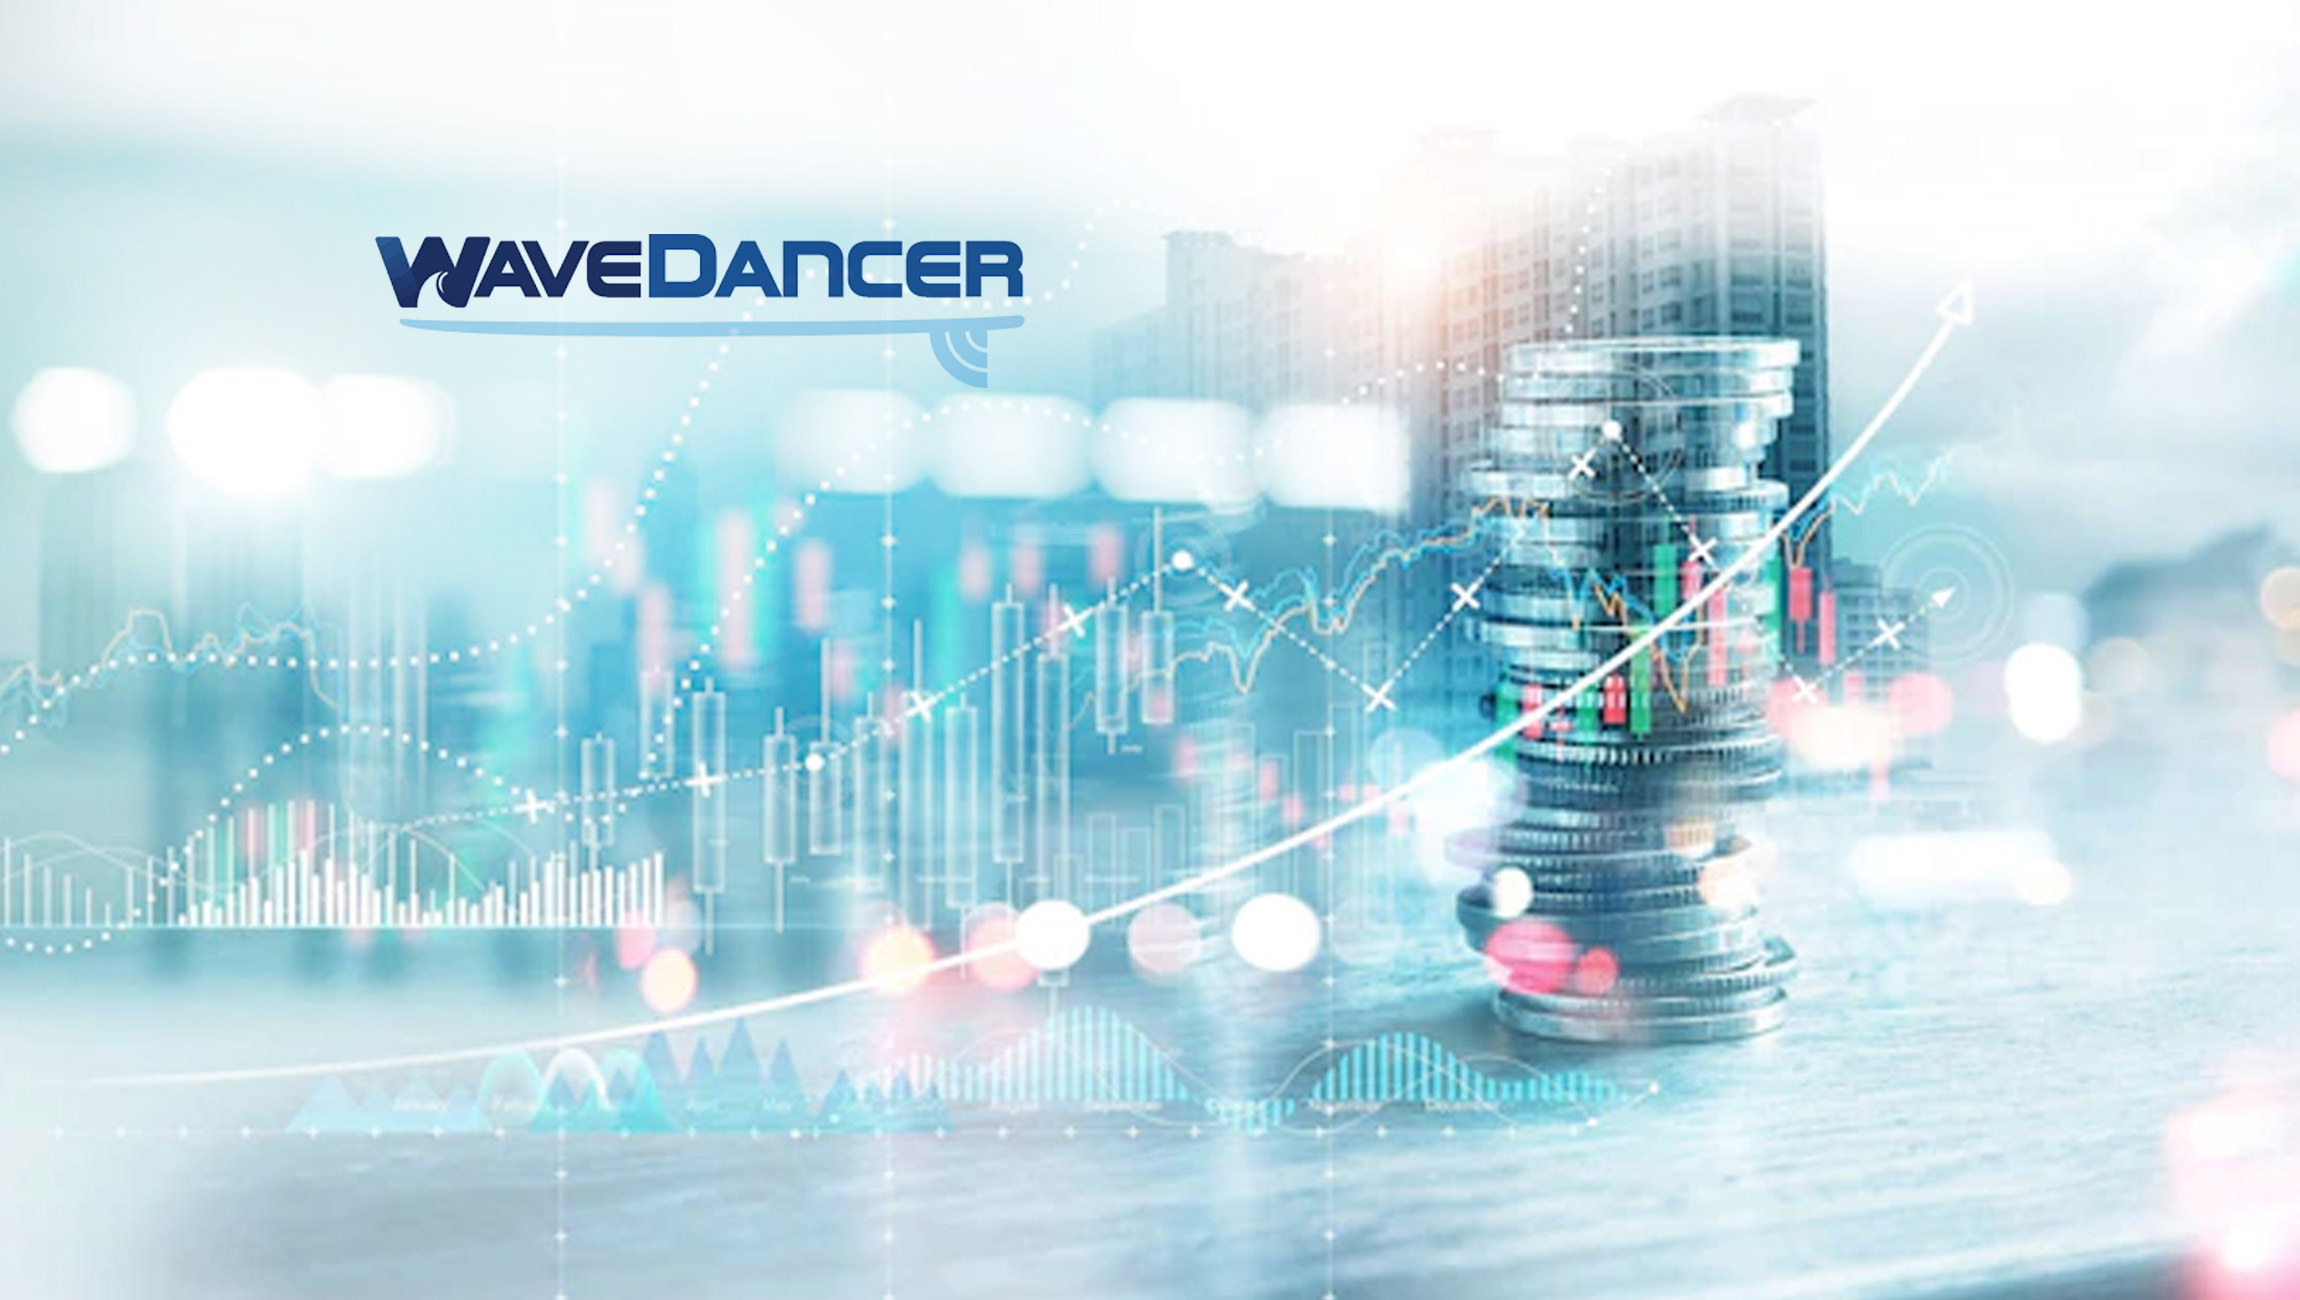 Wavedancer Wraps up Year With Nearly $500K of Additional Revenue in Its Secure Supply Chain Technology Business